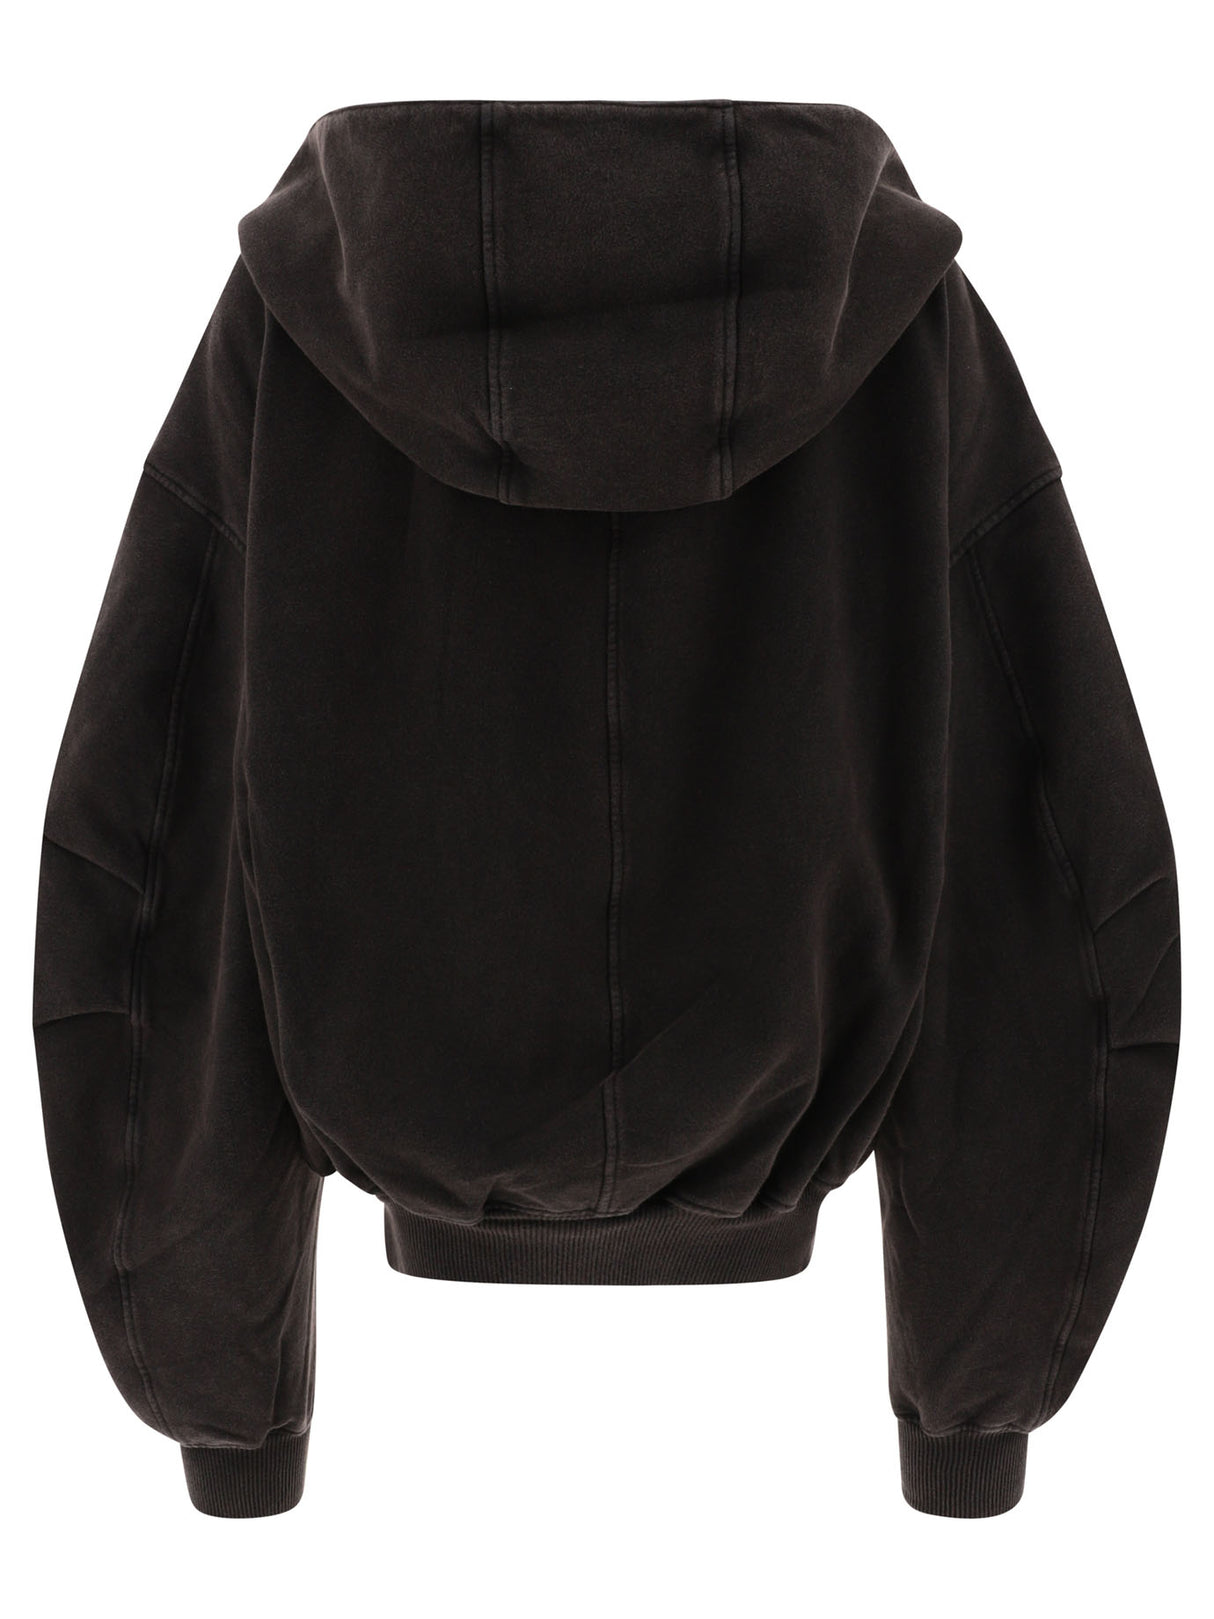 THE ATTICO ZIPPERED HOODIE WITH LOGO